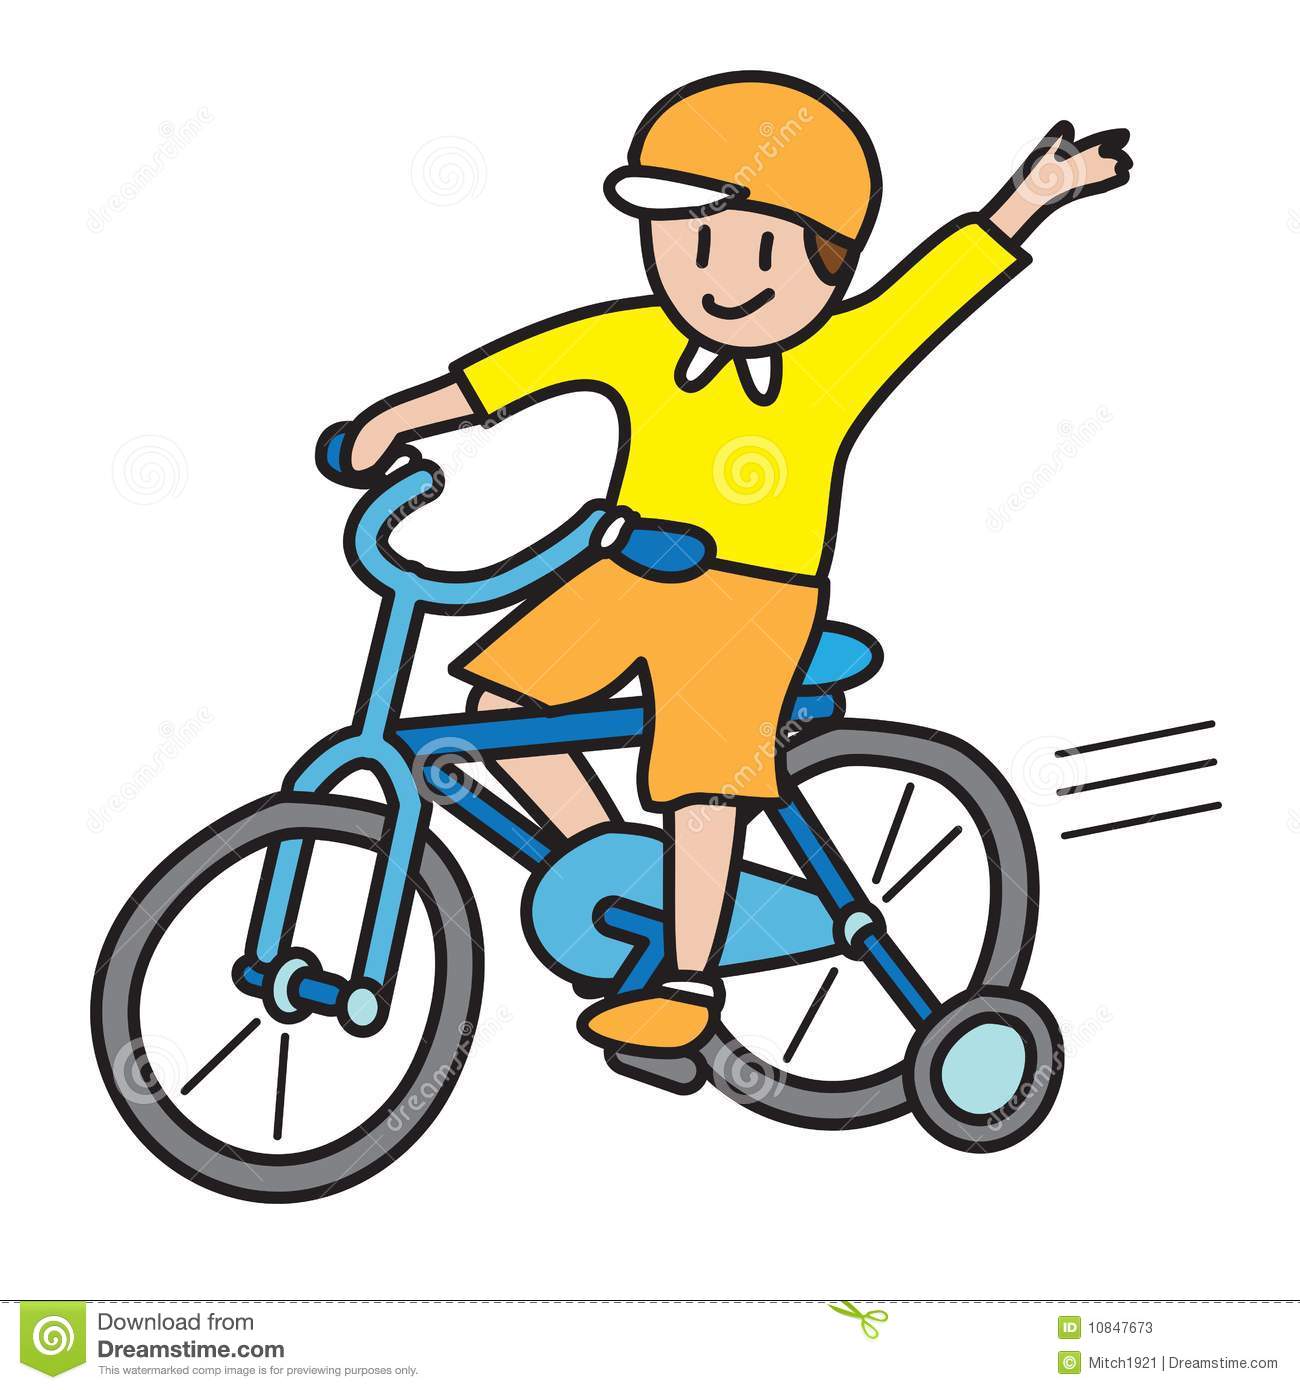 Boy Riding Bicycle Vector Illustration Isolated On White Background